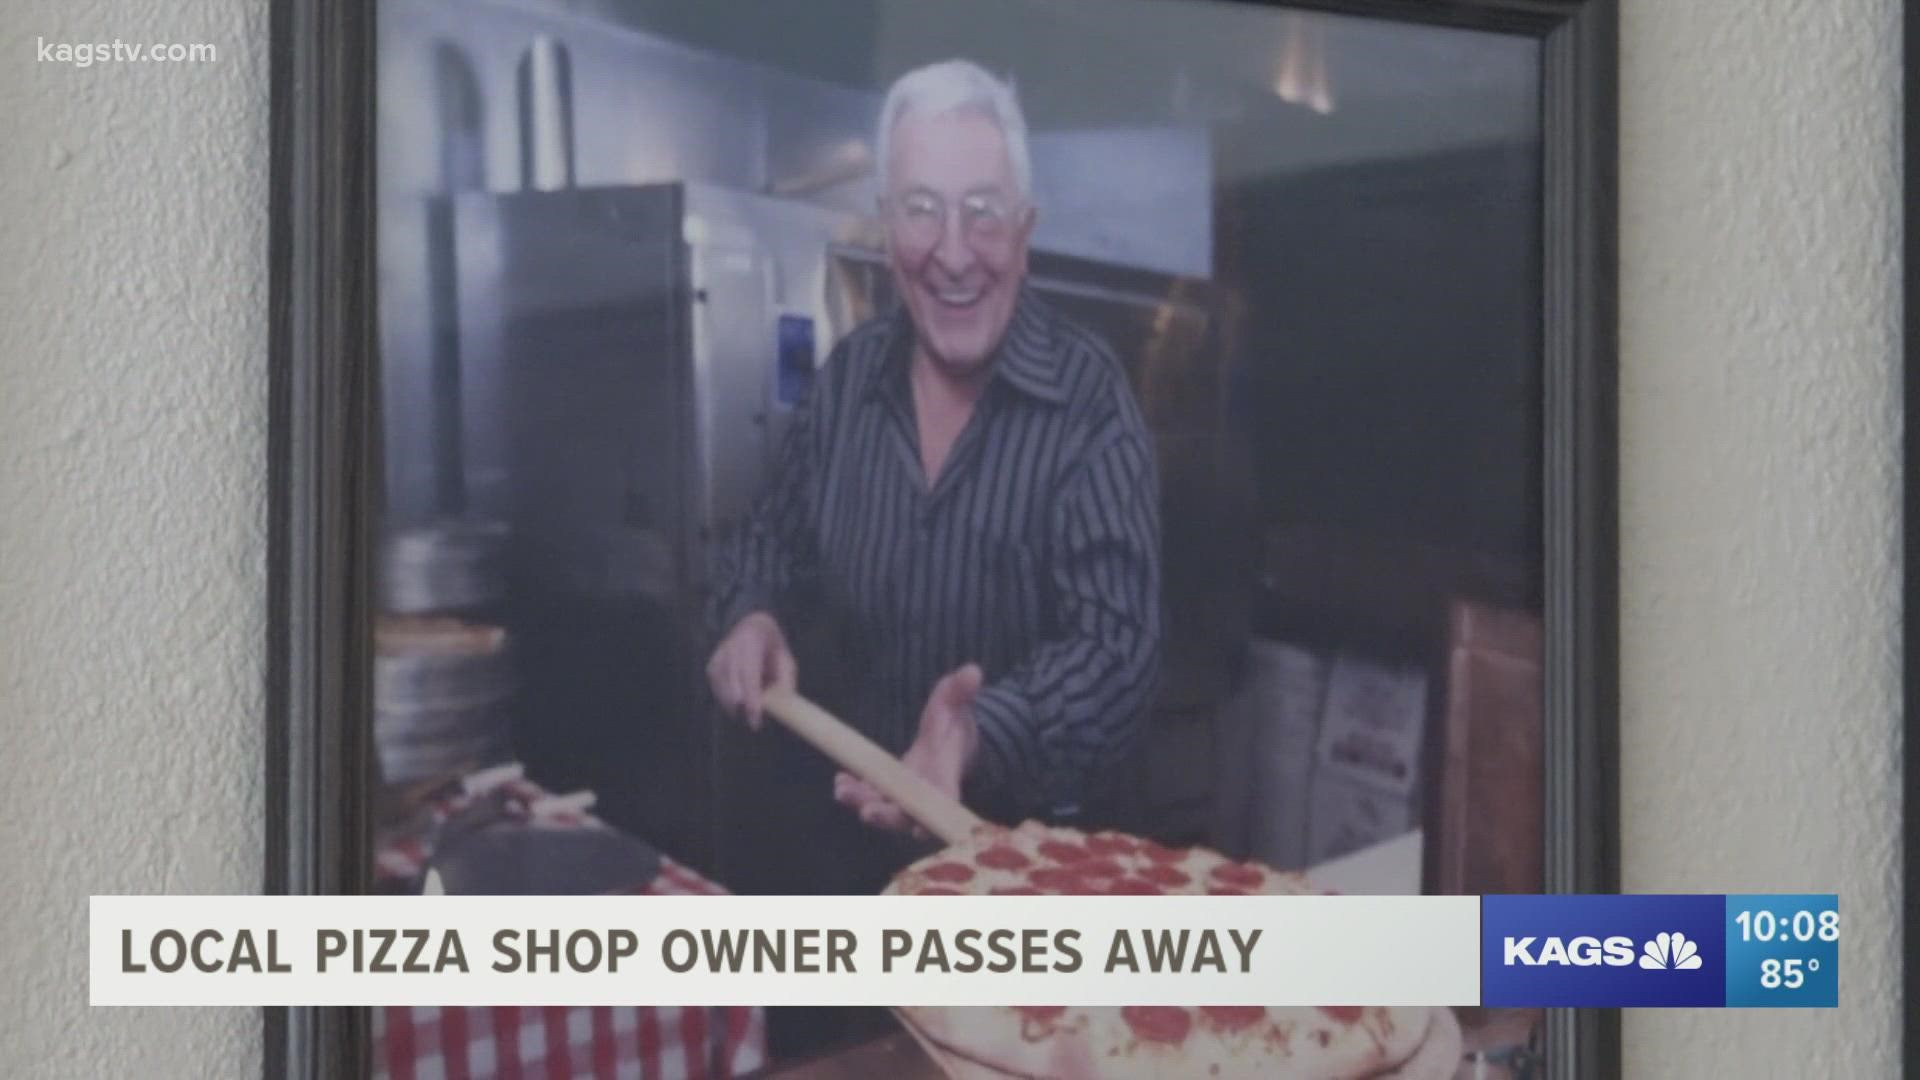 Despite his passing, his friends and family will keep Mr. G's Pizzeria going to carry on the Bryan businessman's legacy.